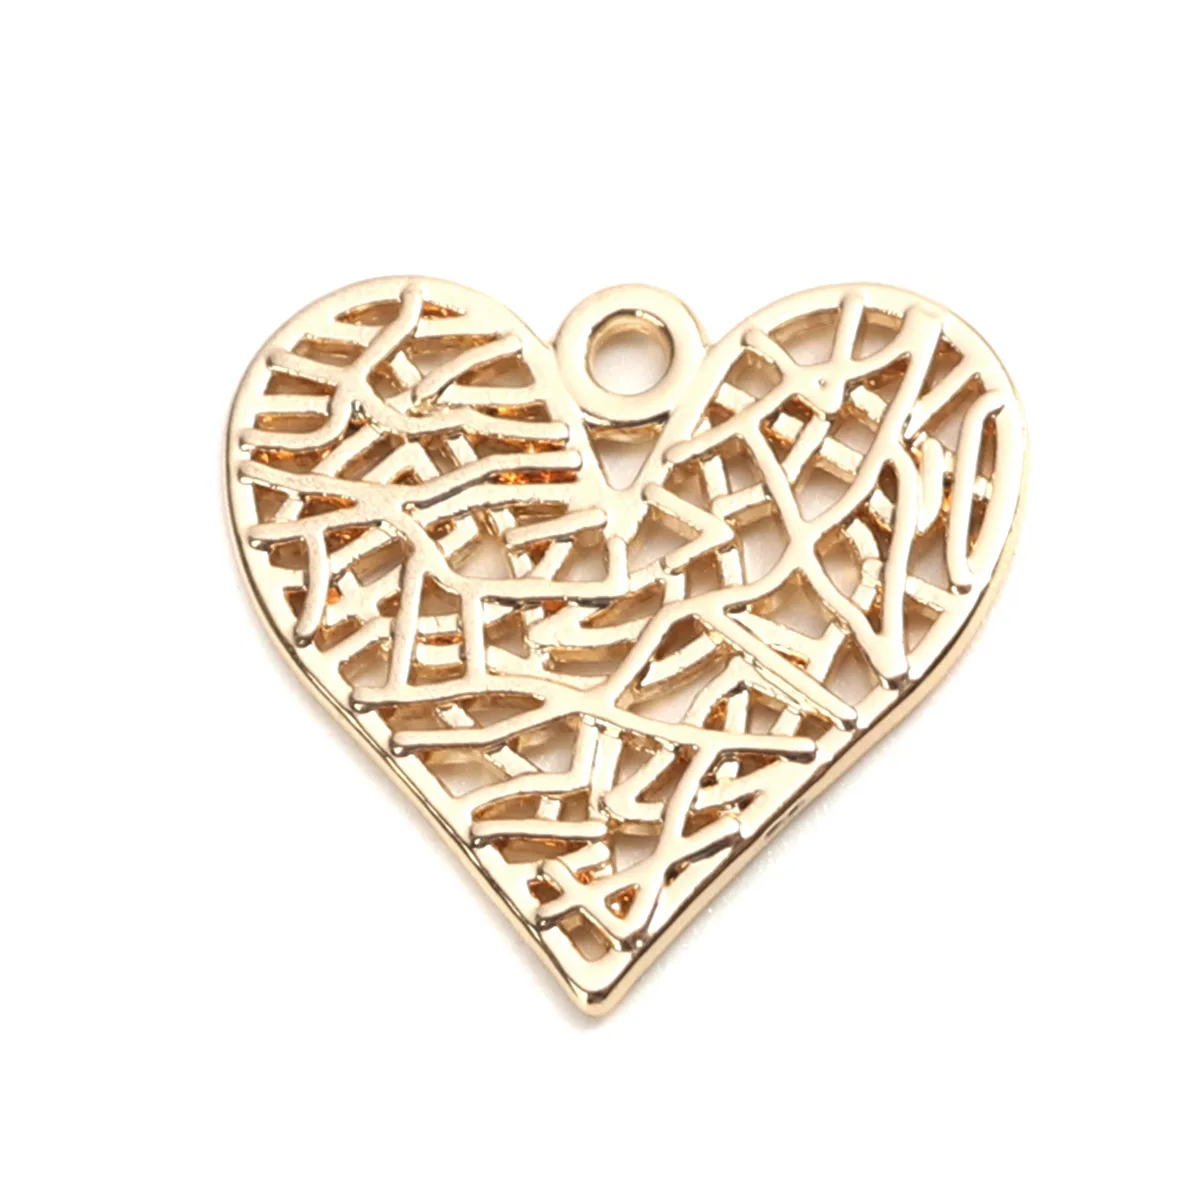 

Stripe Hollow Heart Pendants Zinc Based Alloy Charms Gold Color 19mm x 18mm For DIY Necklace Jewelry Handmade Making, 10 PCs